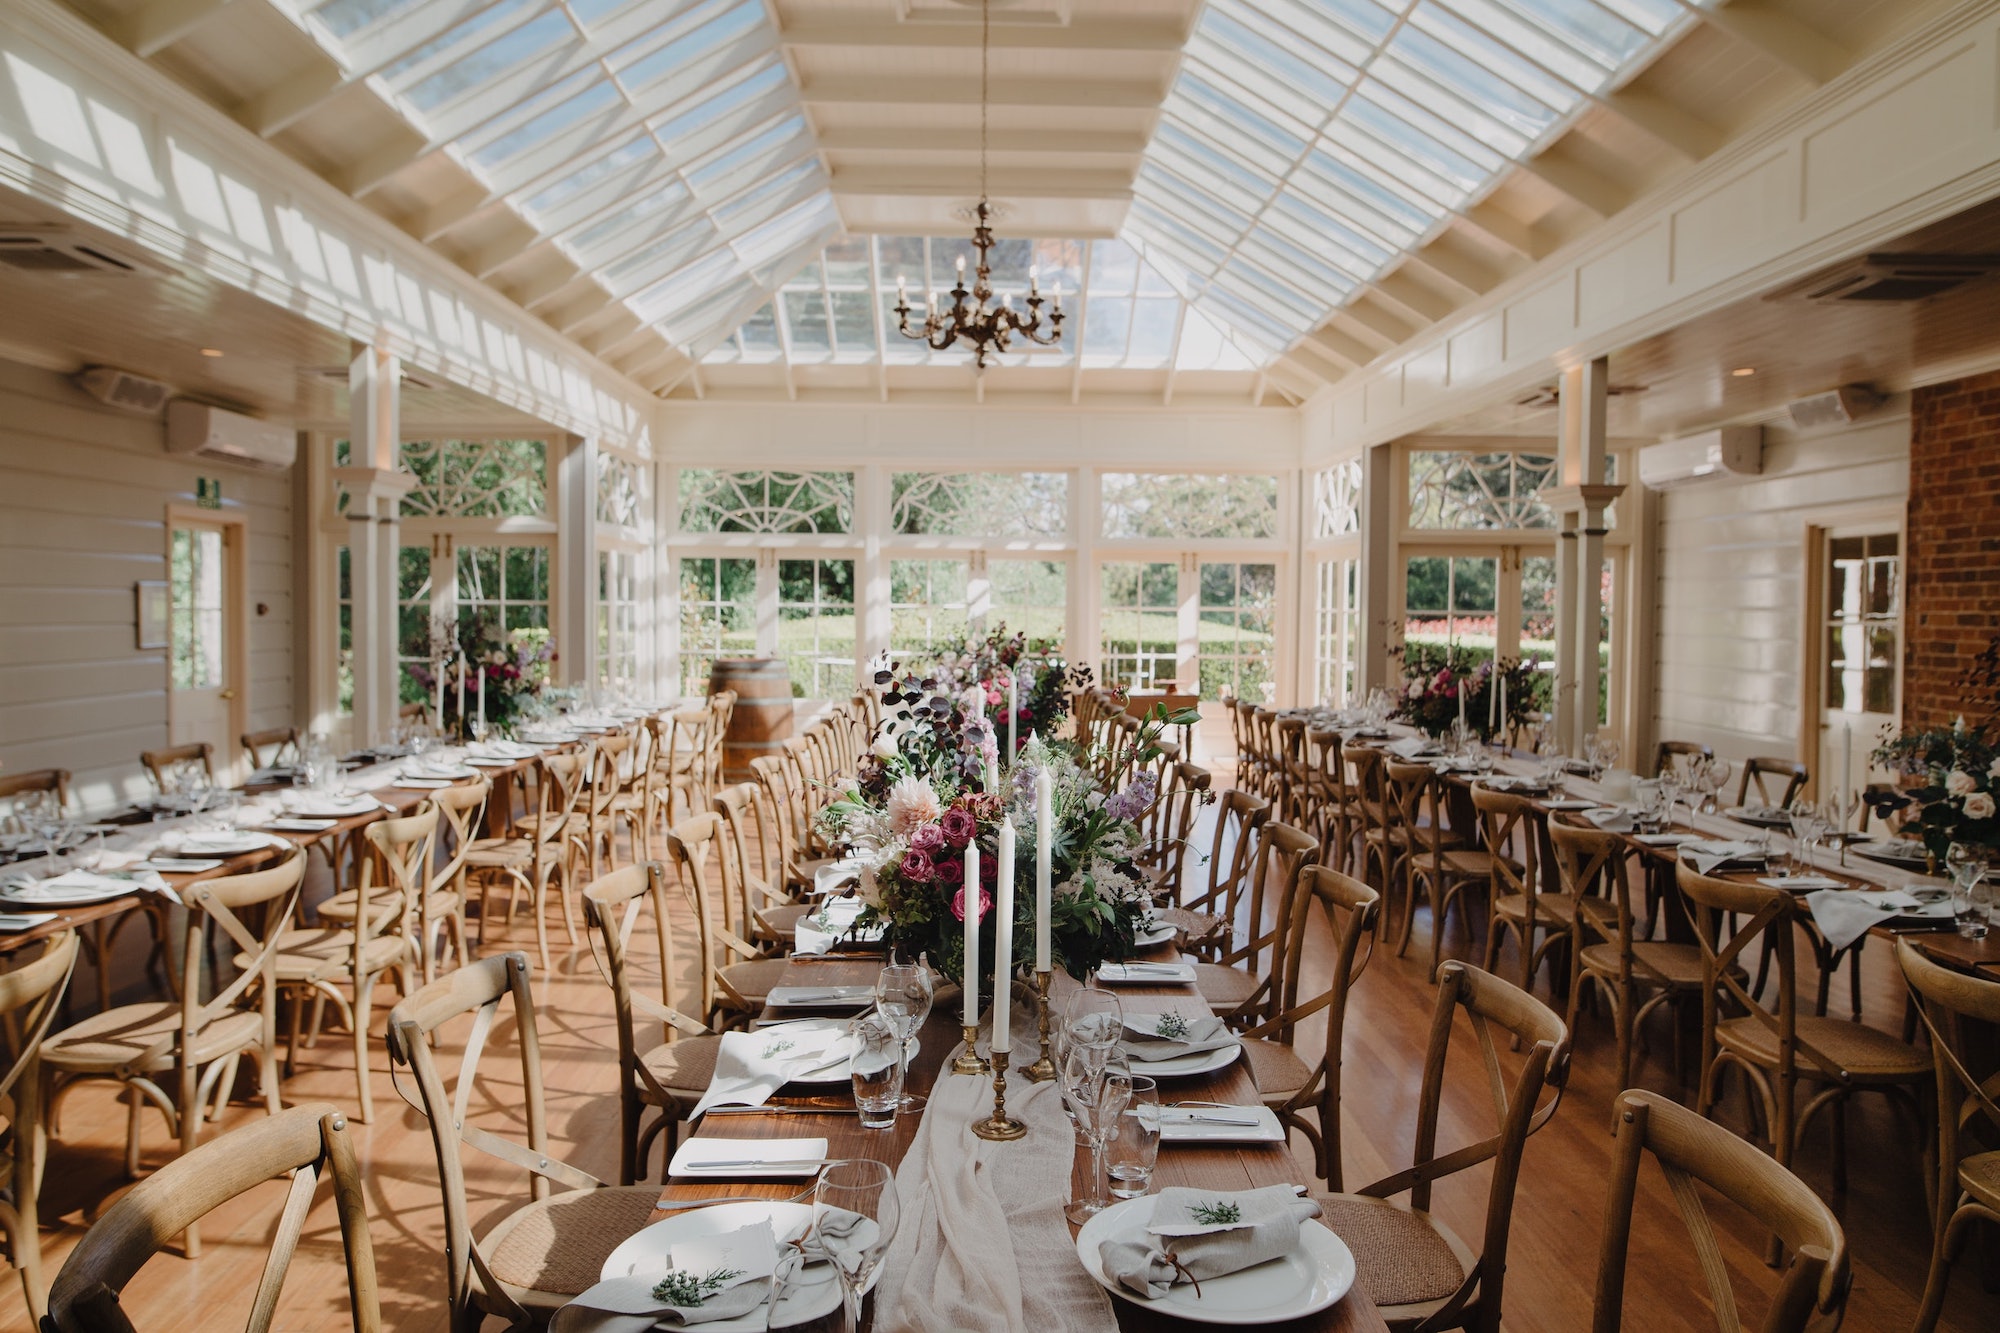 A wedding reception with wooden floors, chairs and tables, flowers and candles